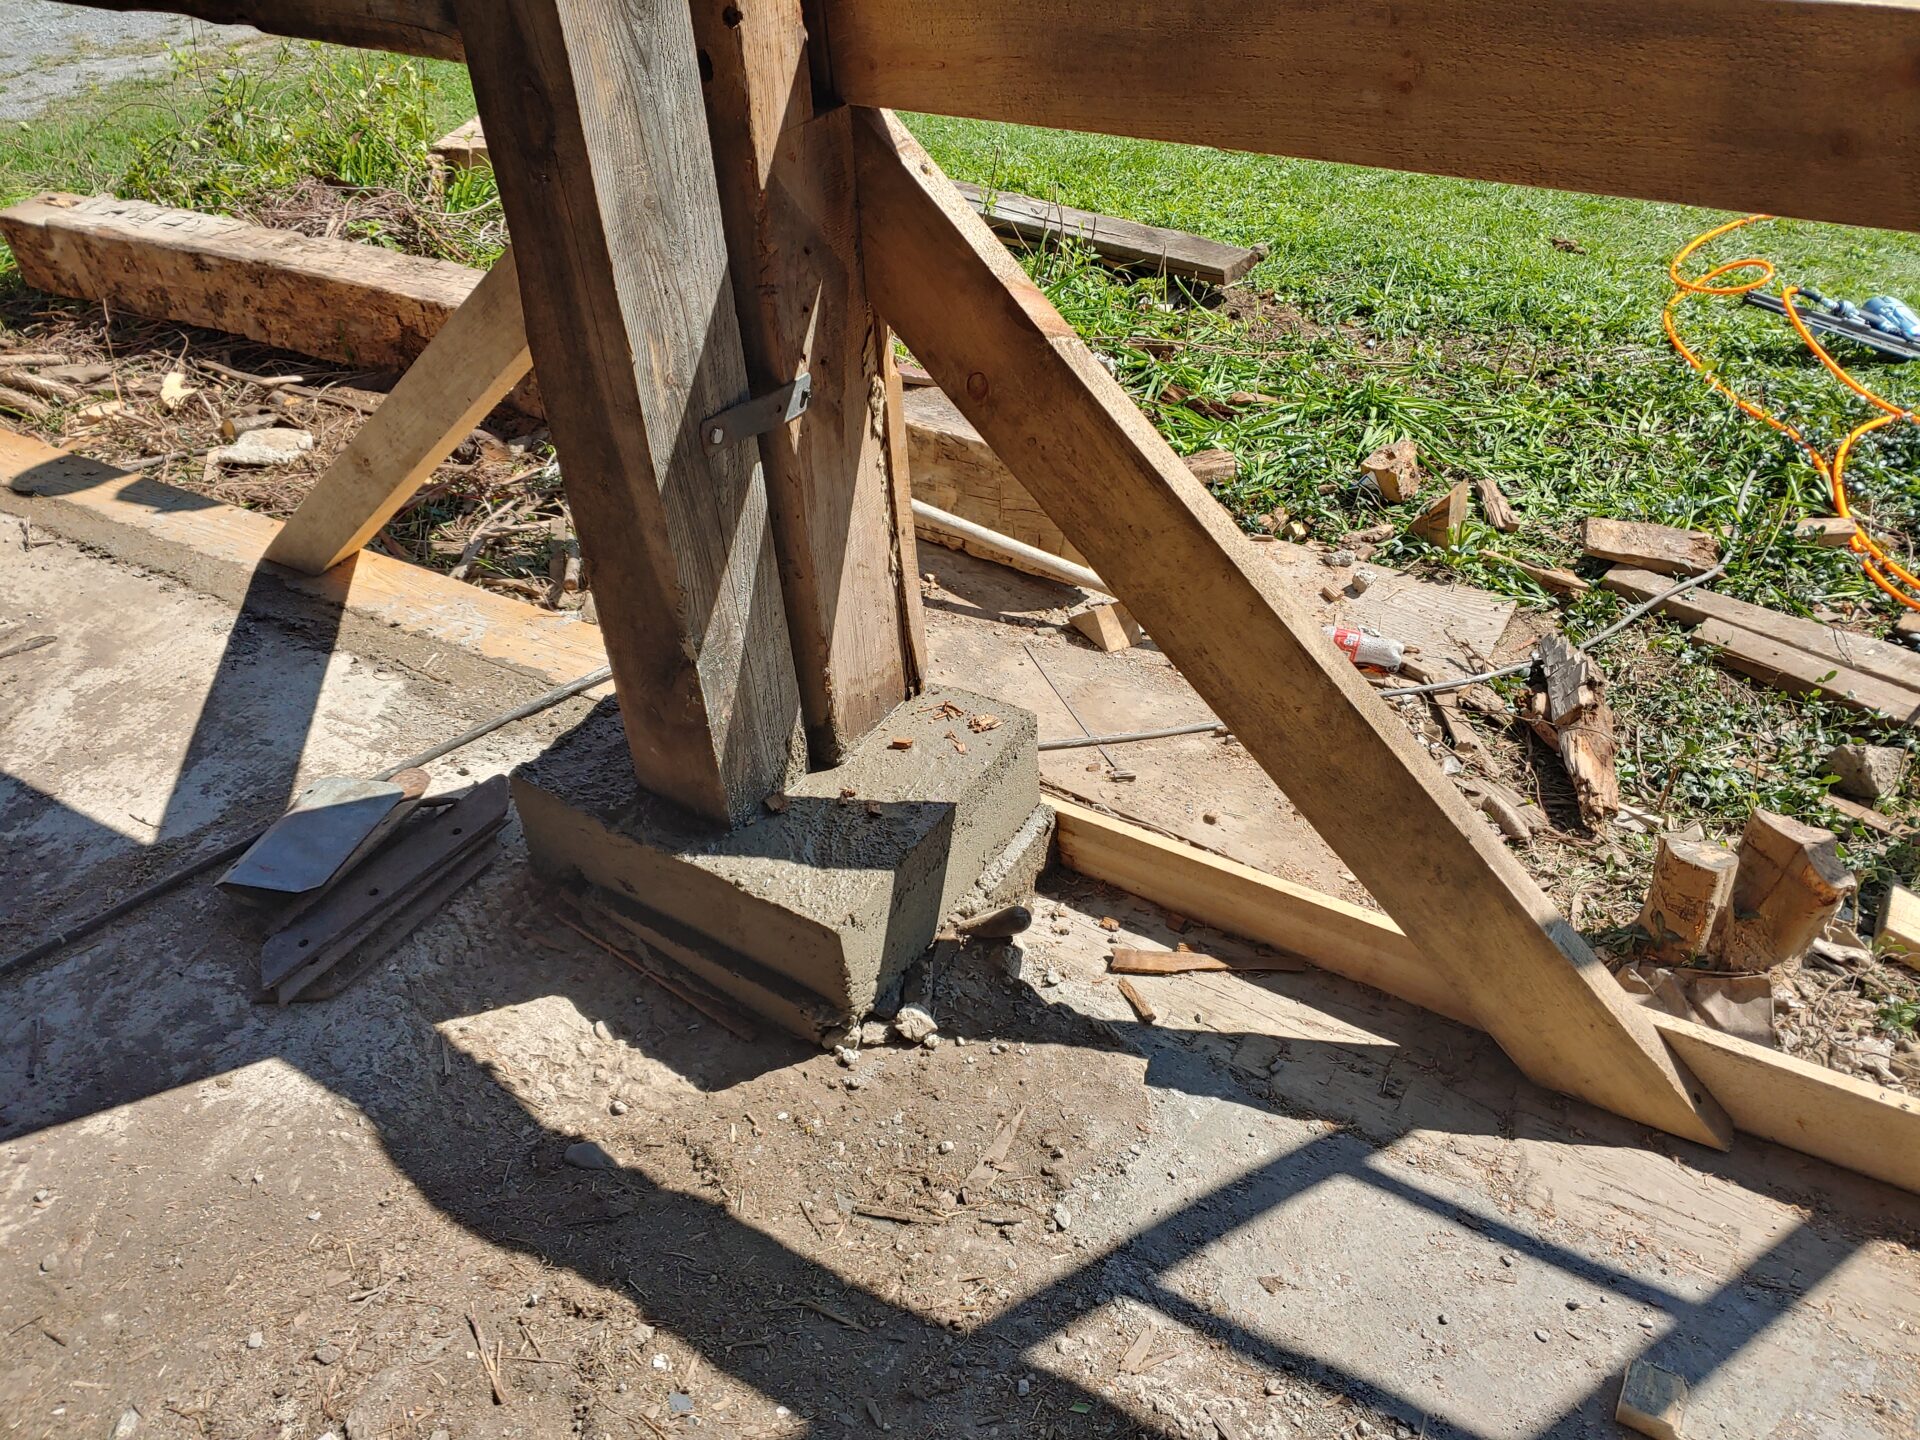 A wooden structure that has been cut off of the ground.